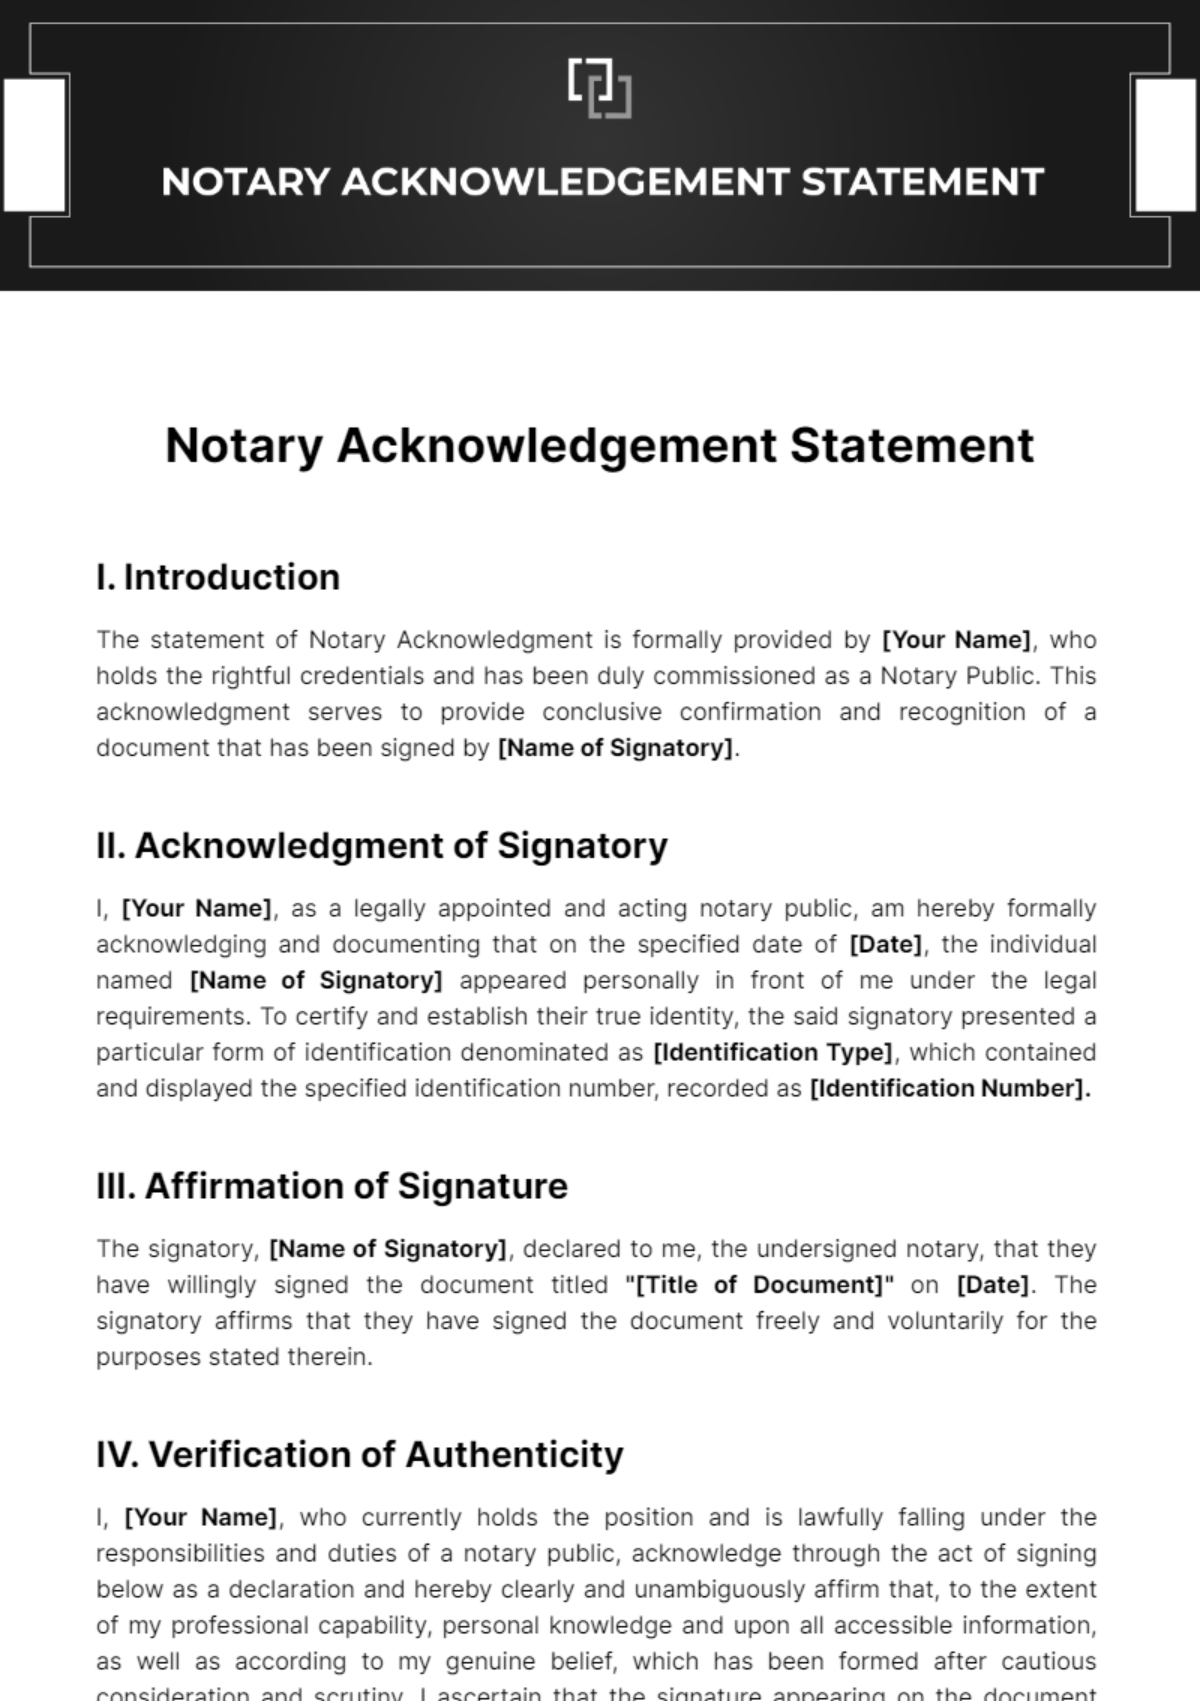 Notary Acknowledgement Statement Template